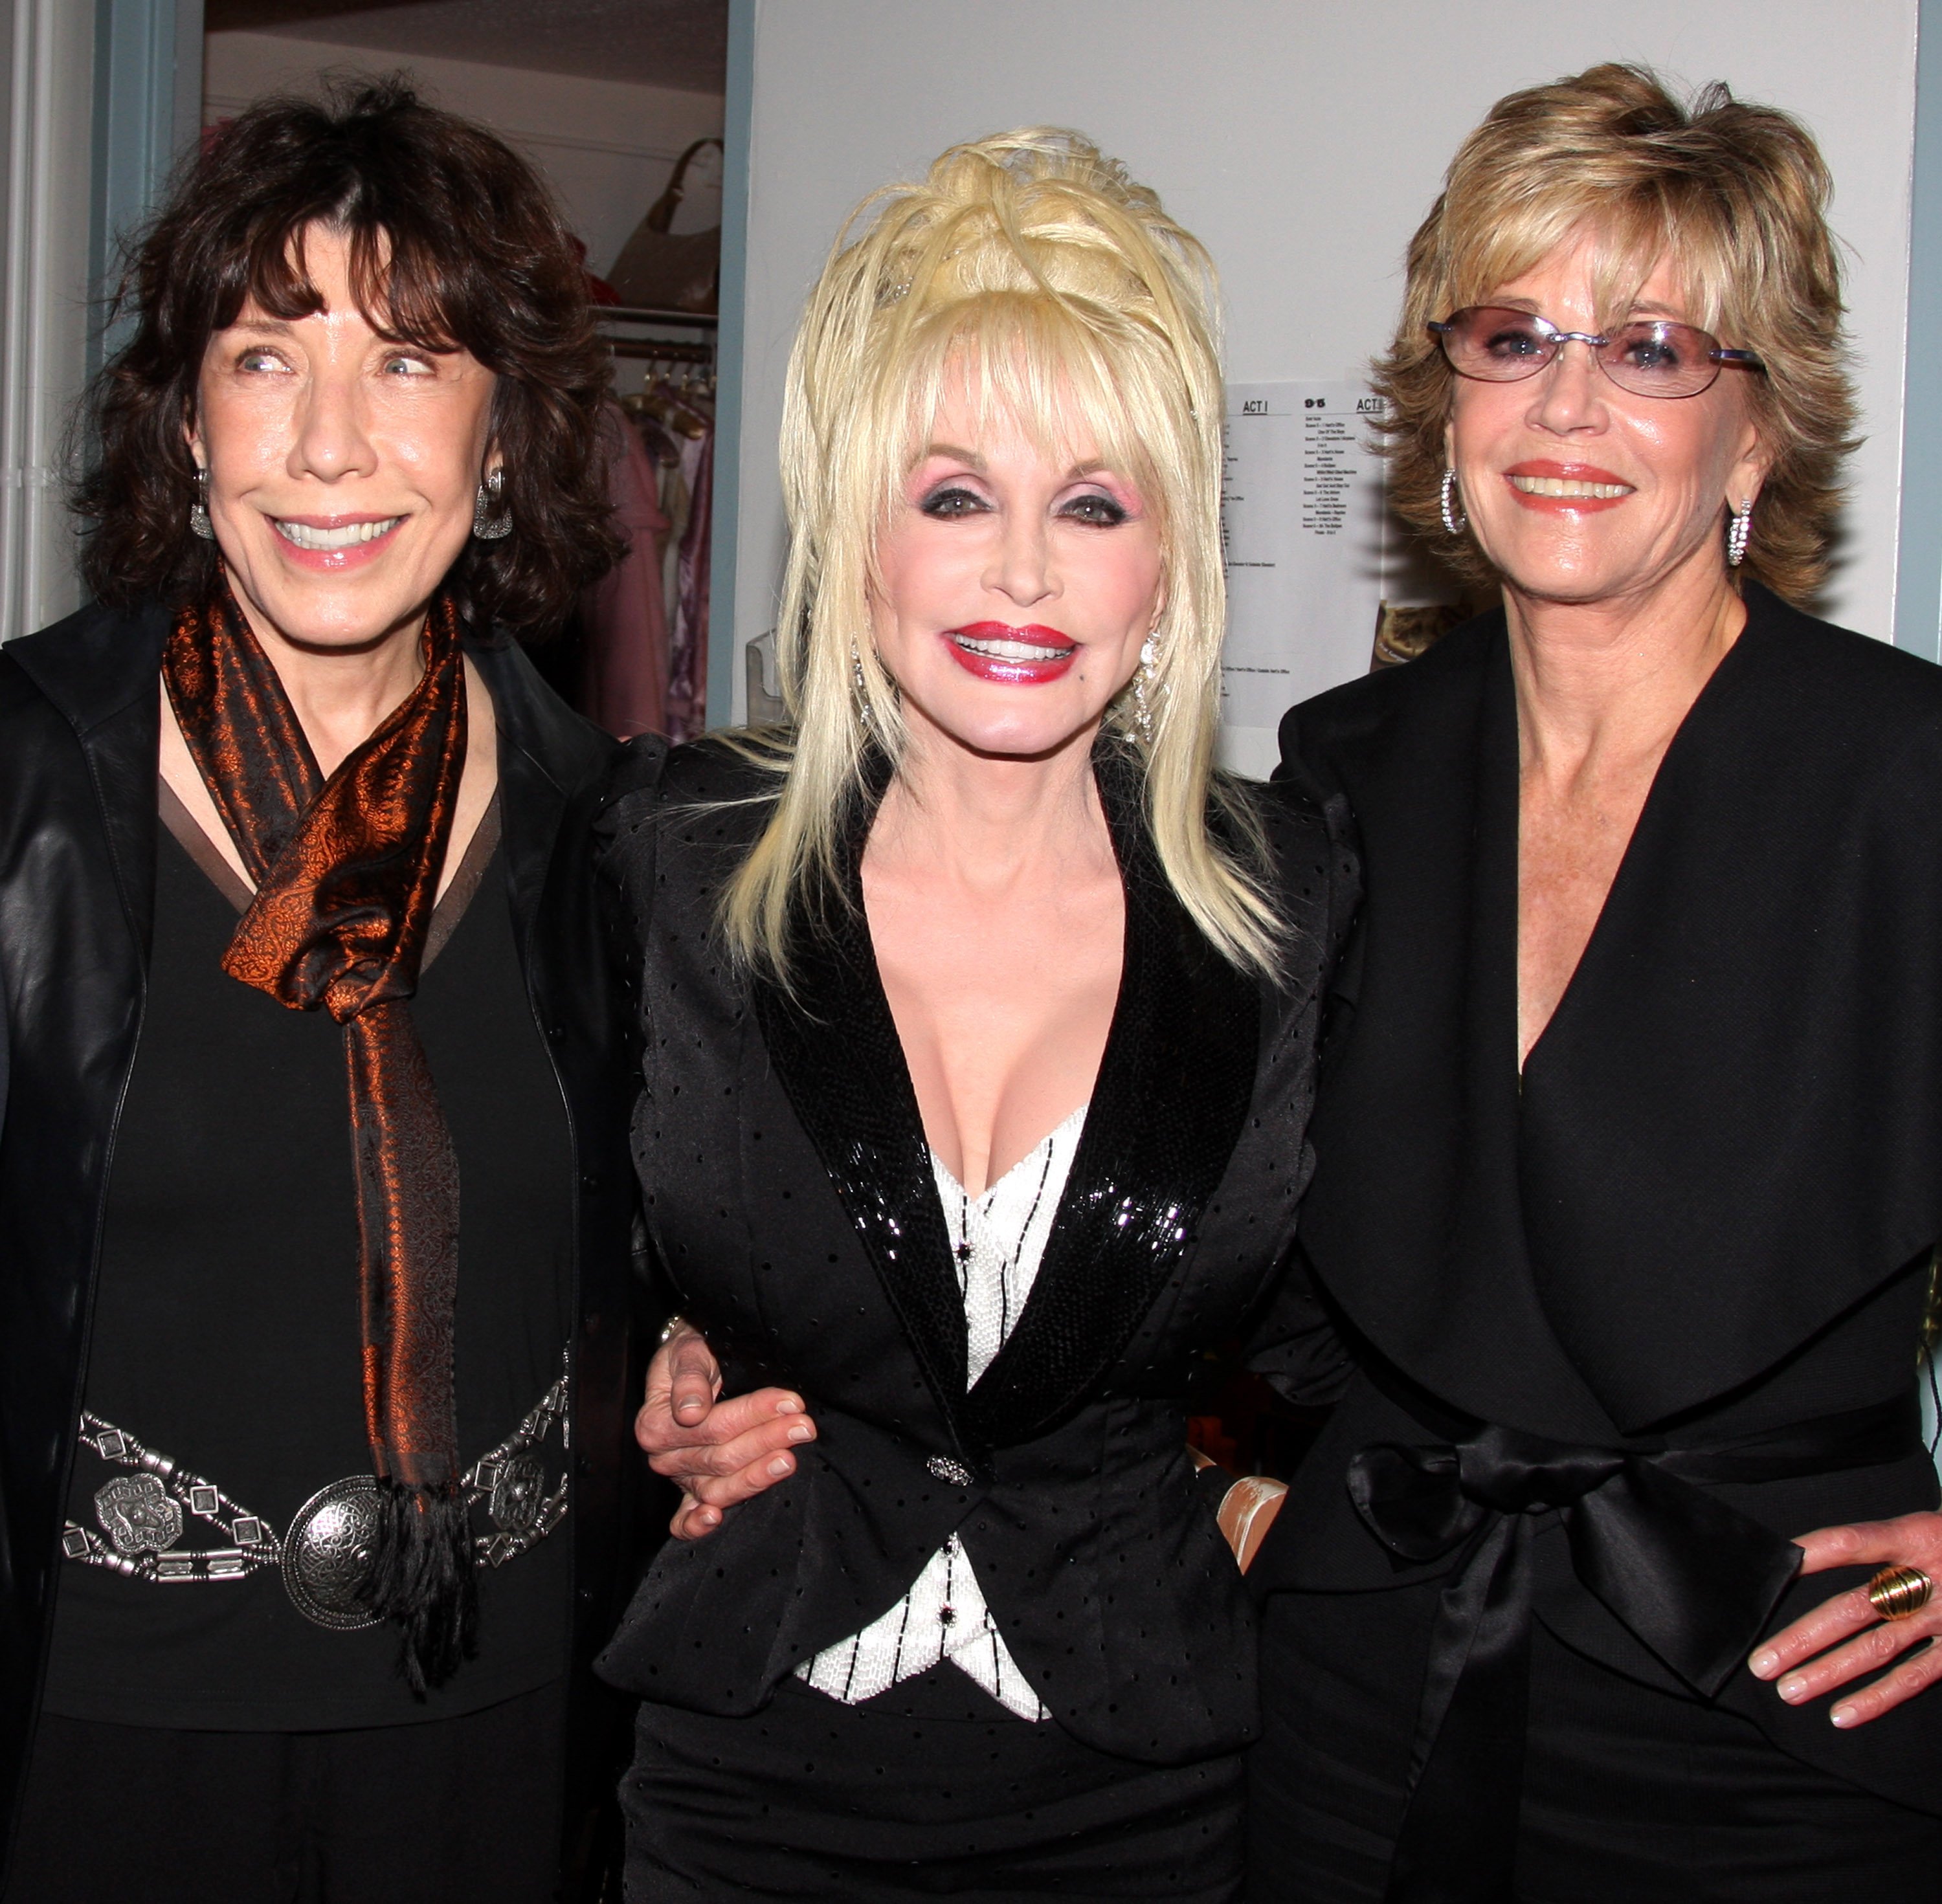 Lily Tomlin, Jane Fonda, and Dolly Parton pose backstage at the opening night of Dolly Parton's "9 to 5" at The Ahmanson Theater on September 20, 2008 in Los Angeles.